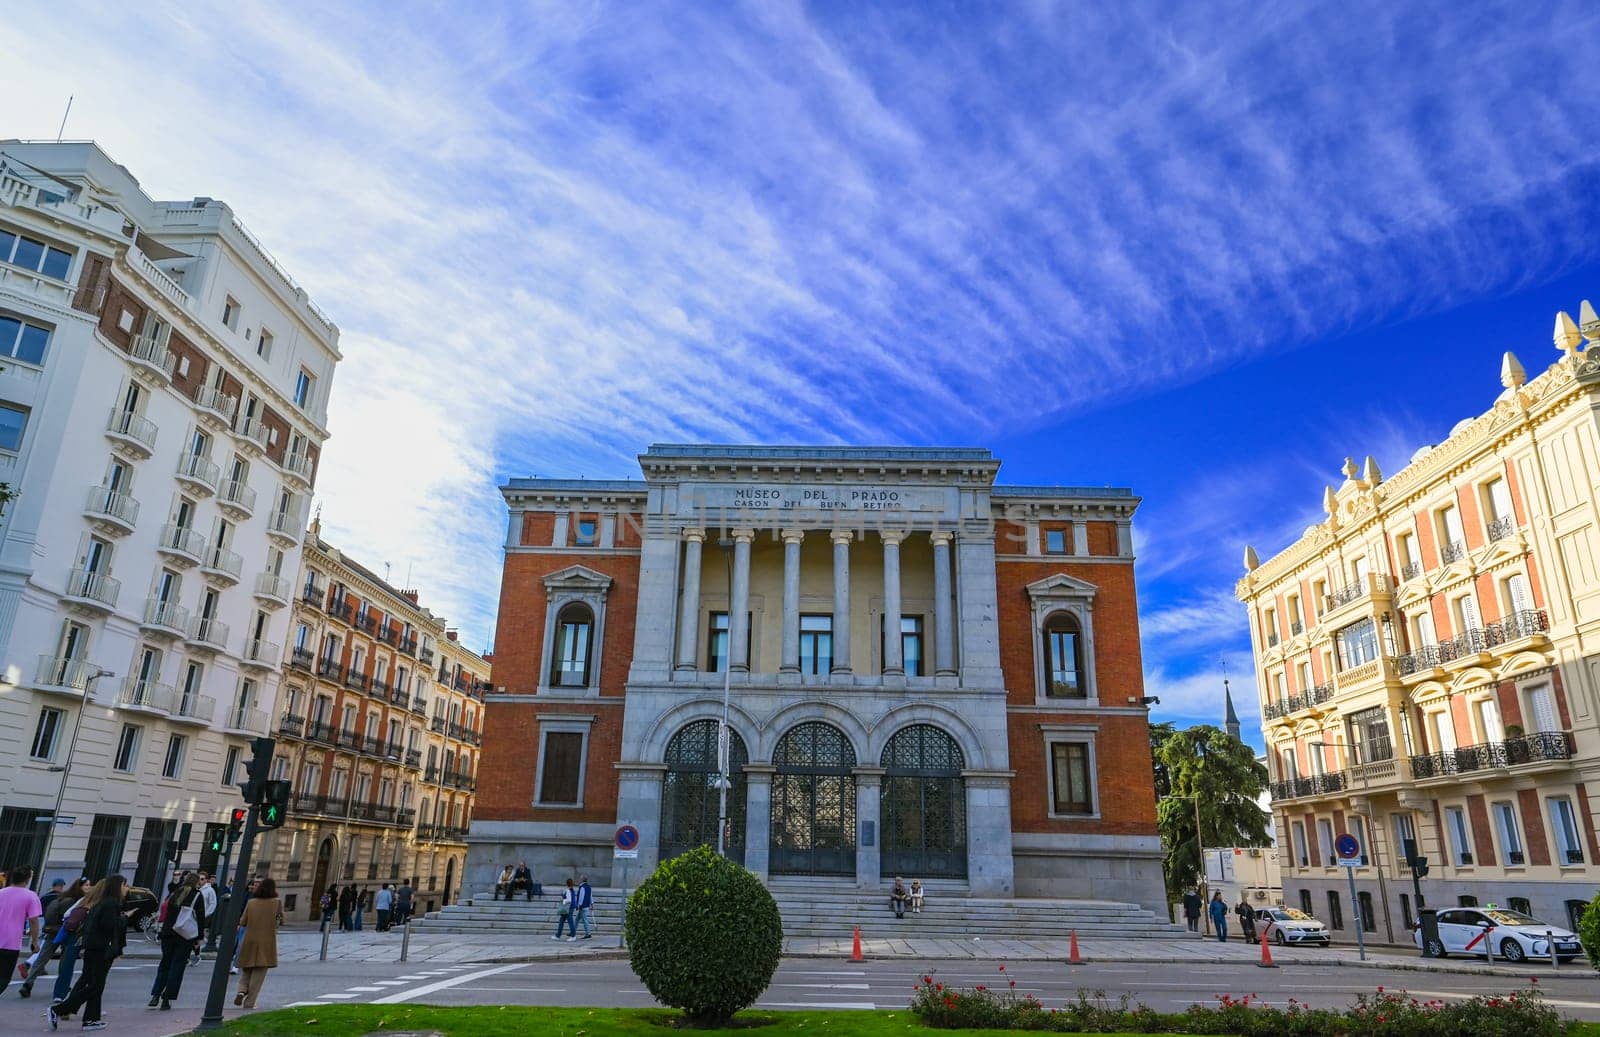 Facade of the National Prado Museum, the most important museum in Madrid by FreeProd